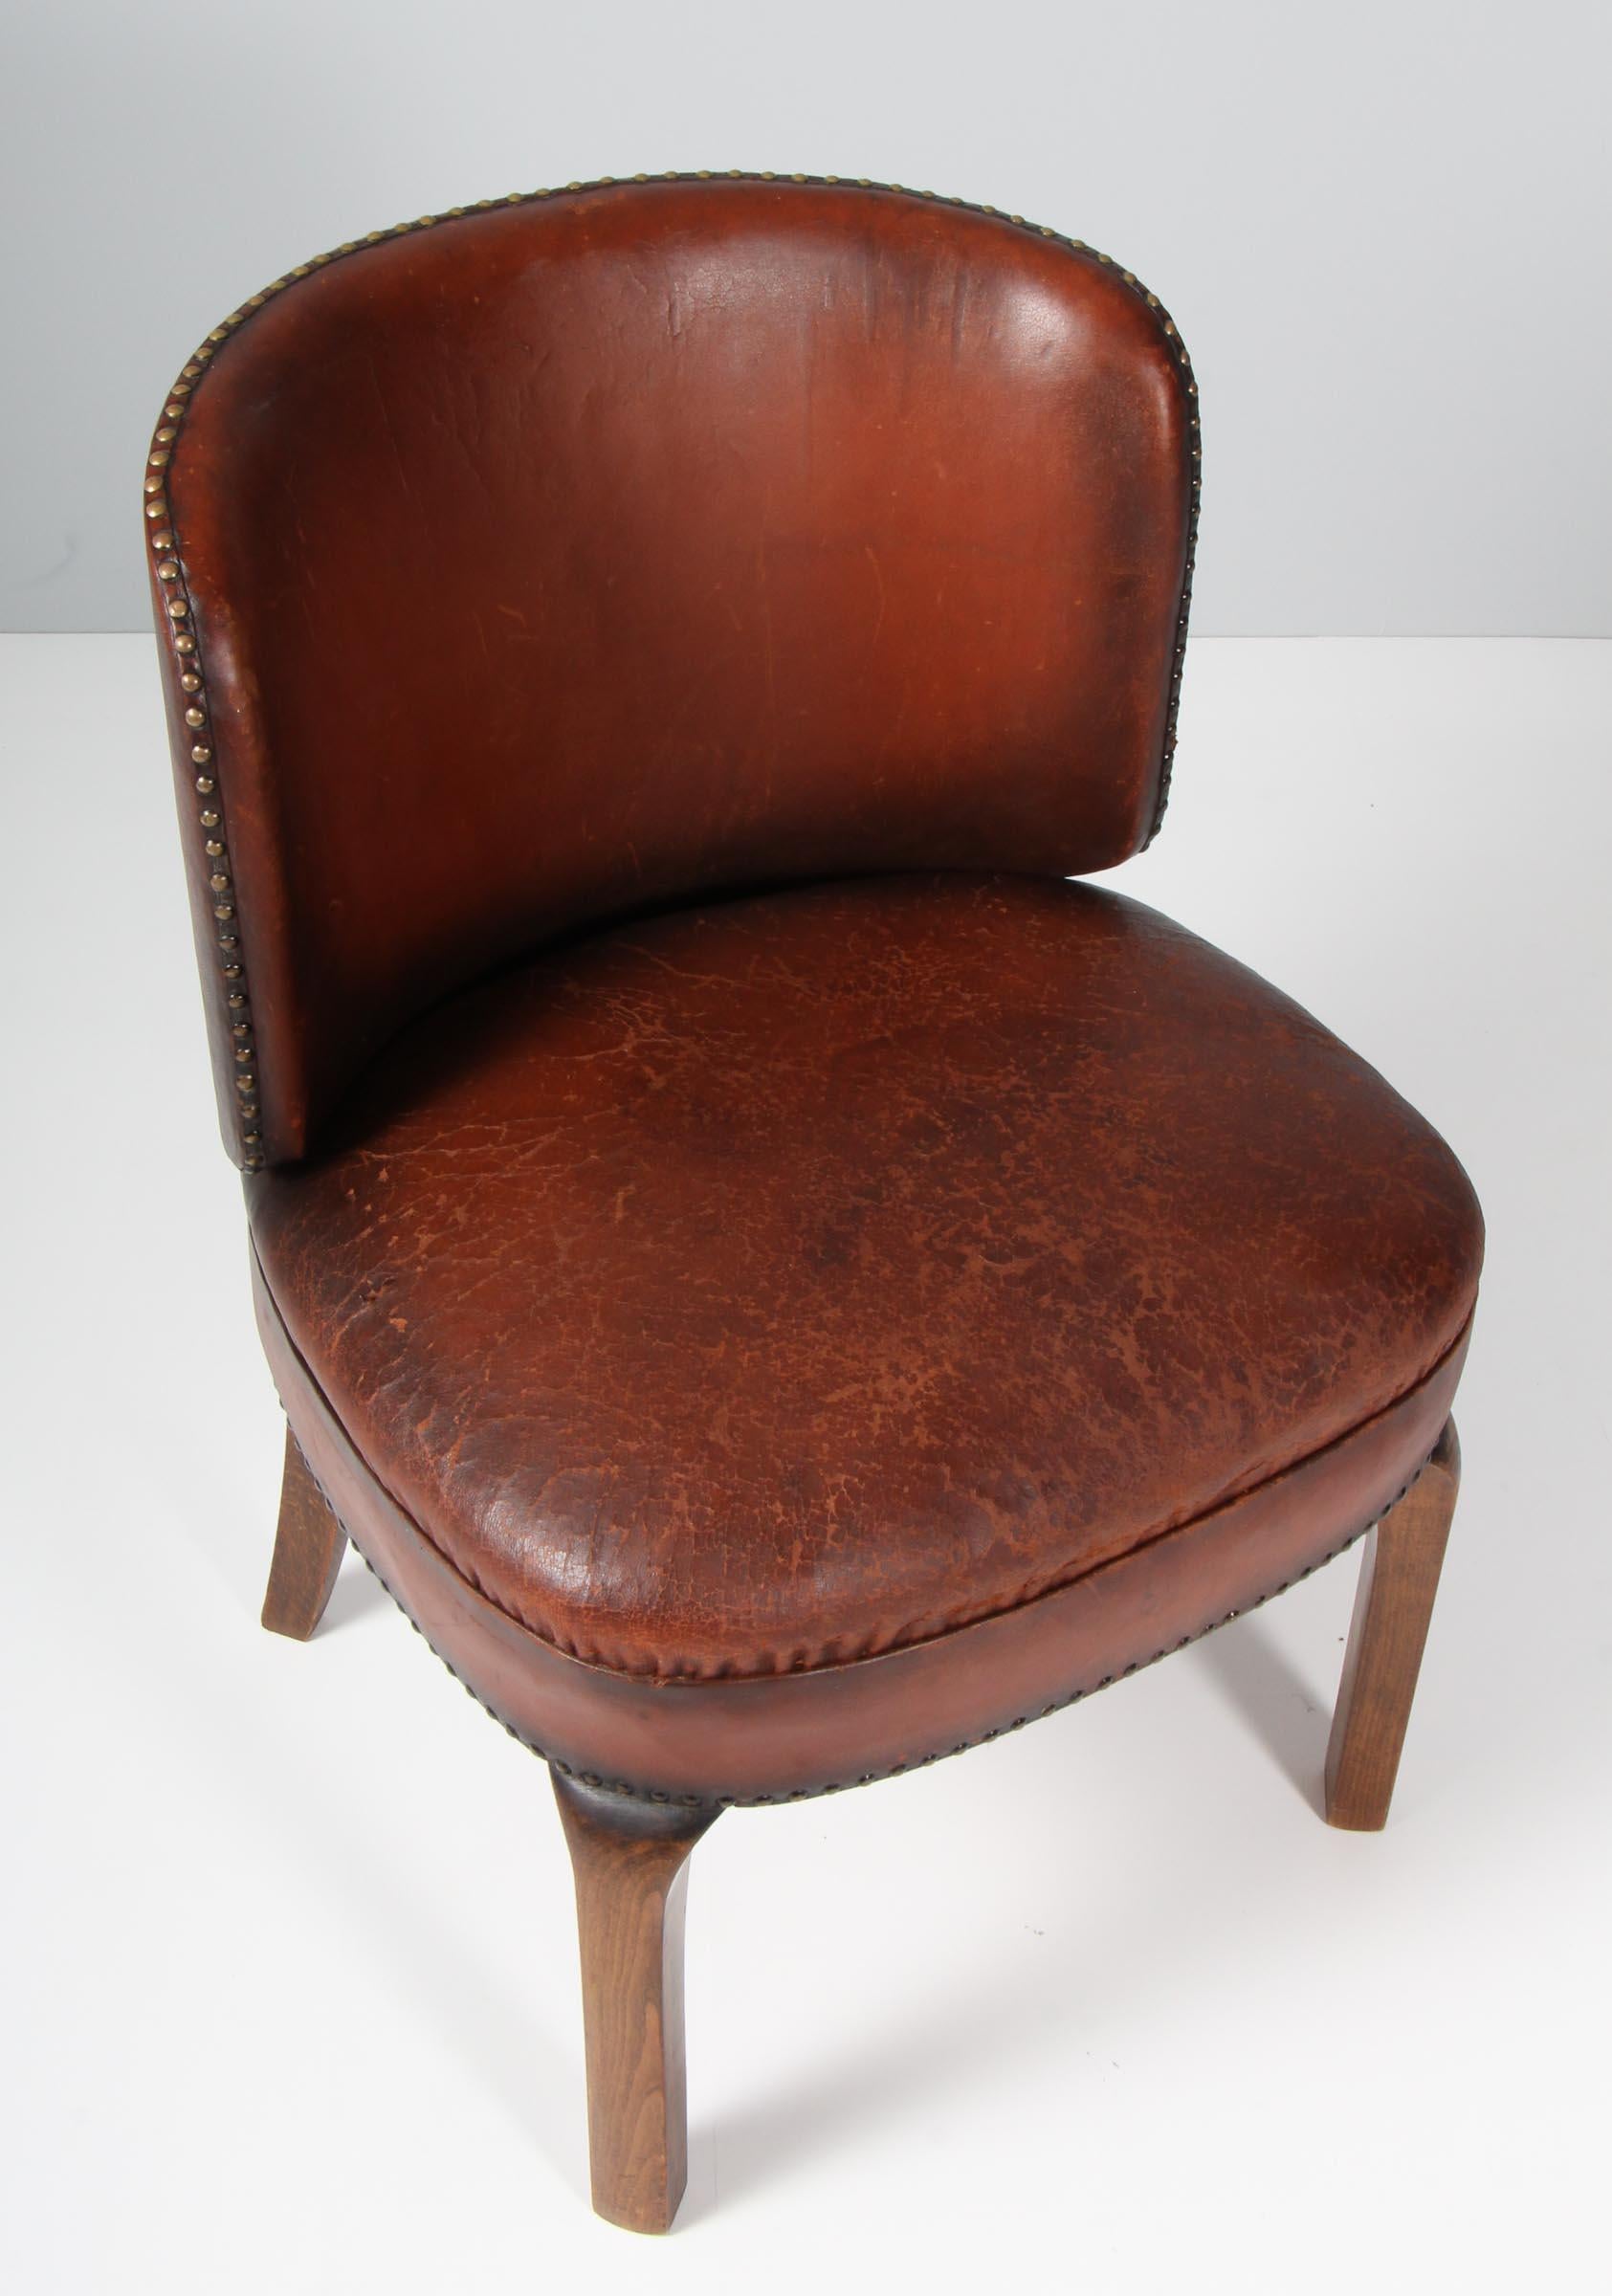 Danish cabinetmaker lounge chair from the 1930s, with original patinated leather. Legs of stained wood.